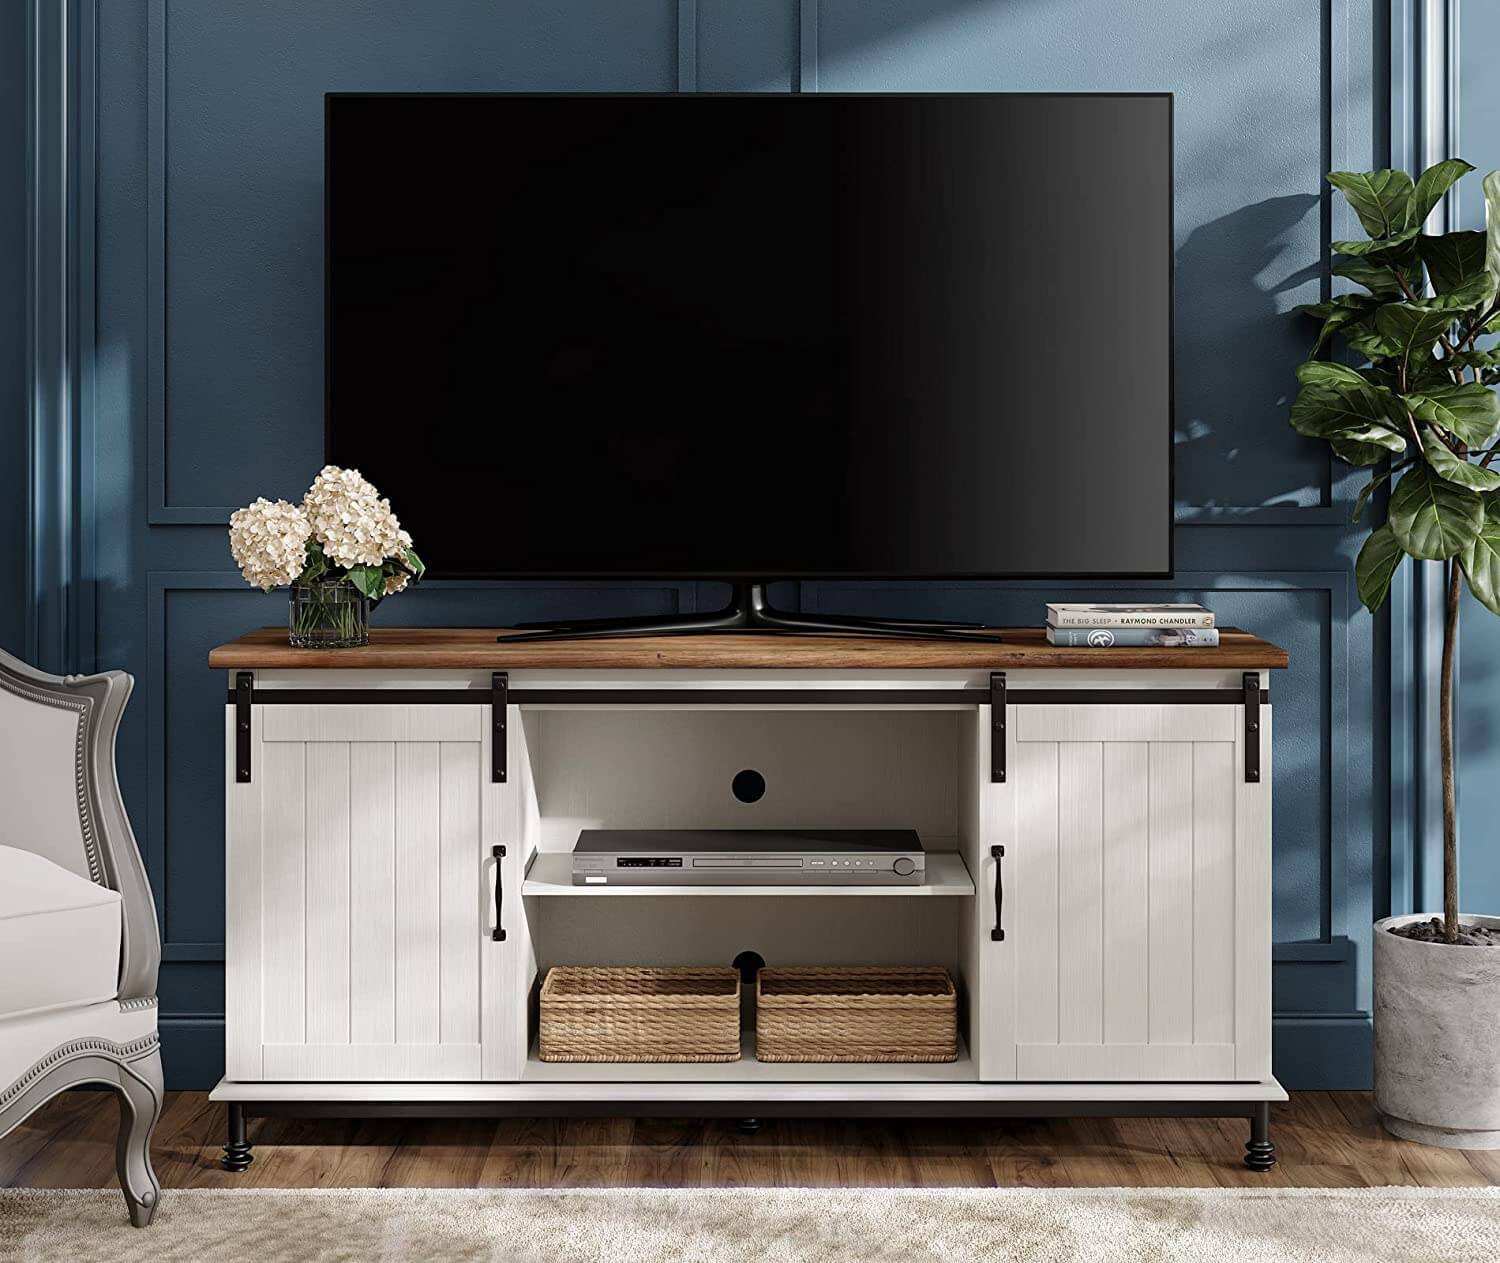 WAMPAT 58” Farmhouse TV Stand for TVs Up to 65 Inch, White